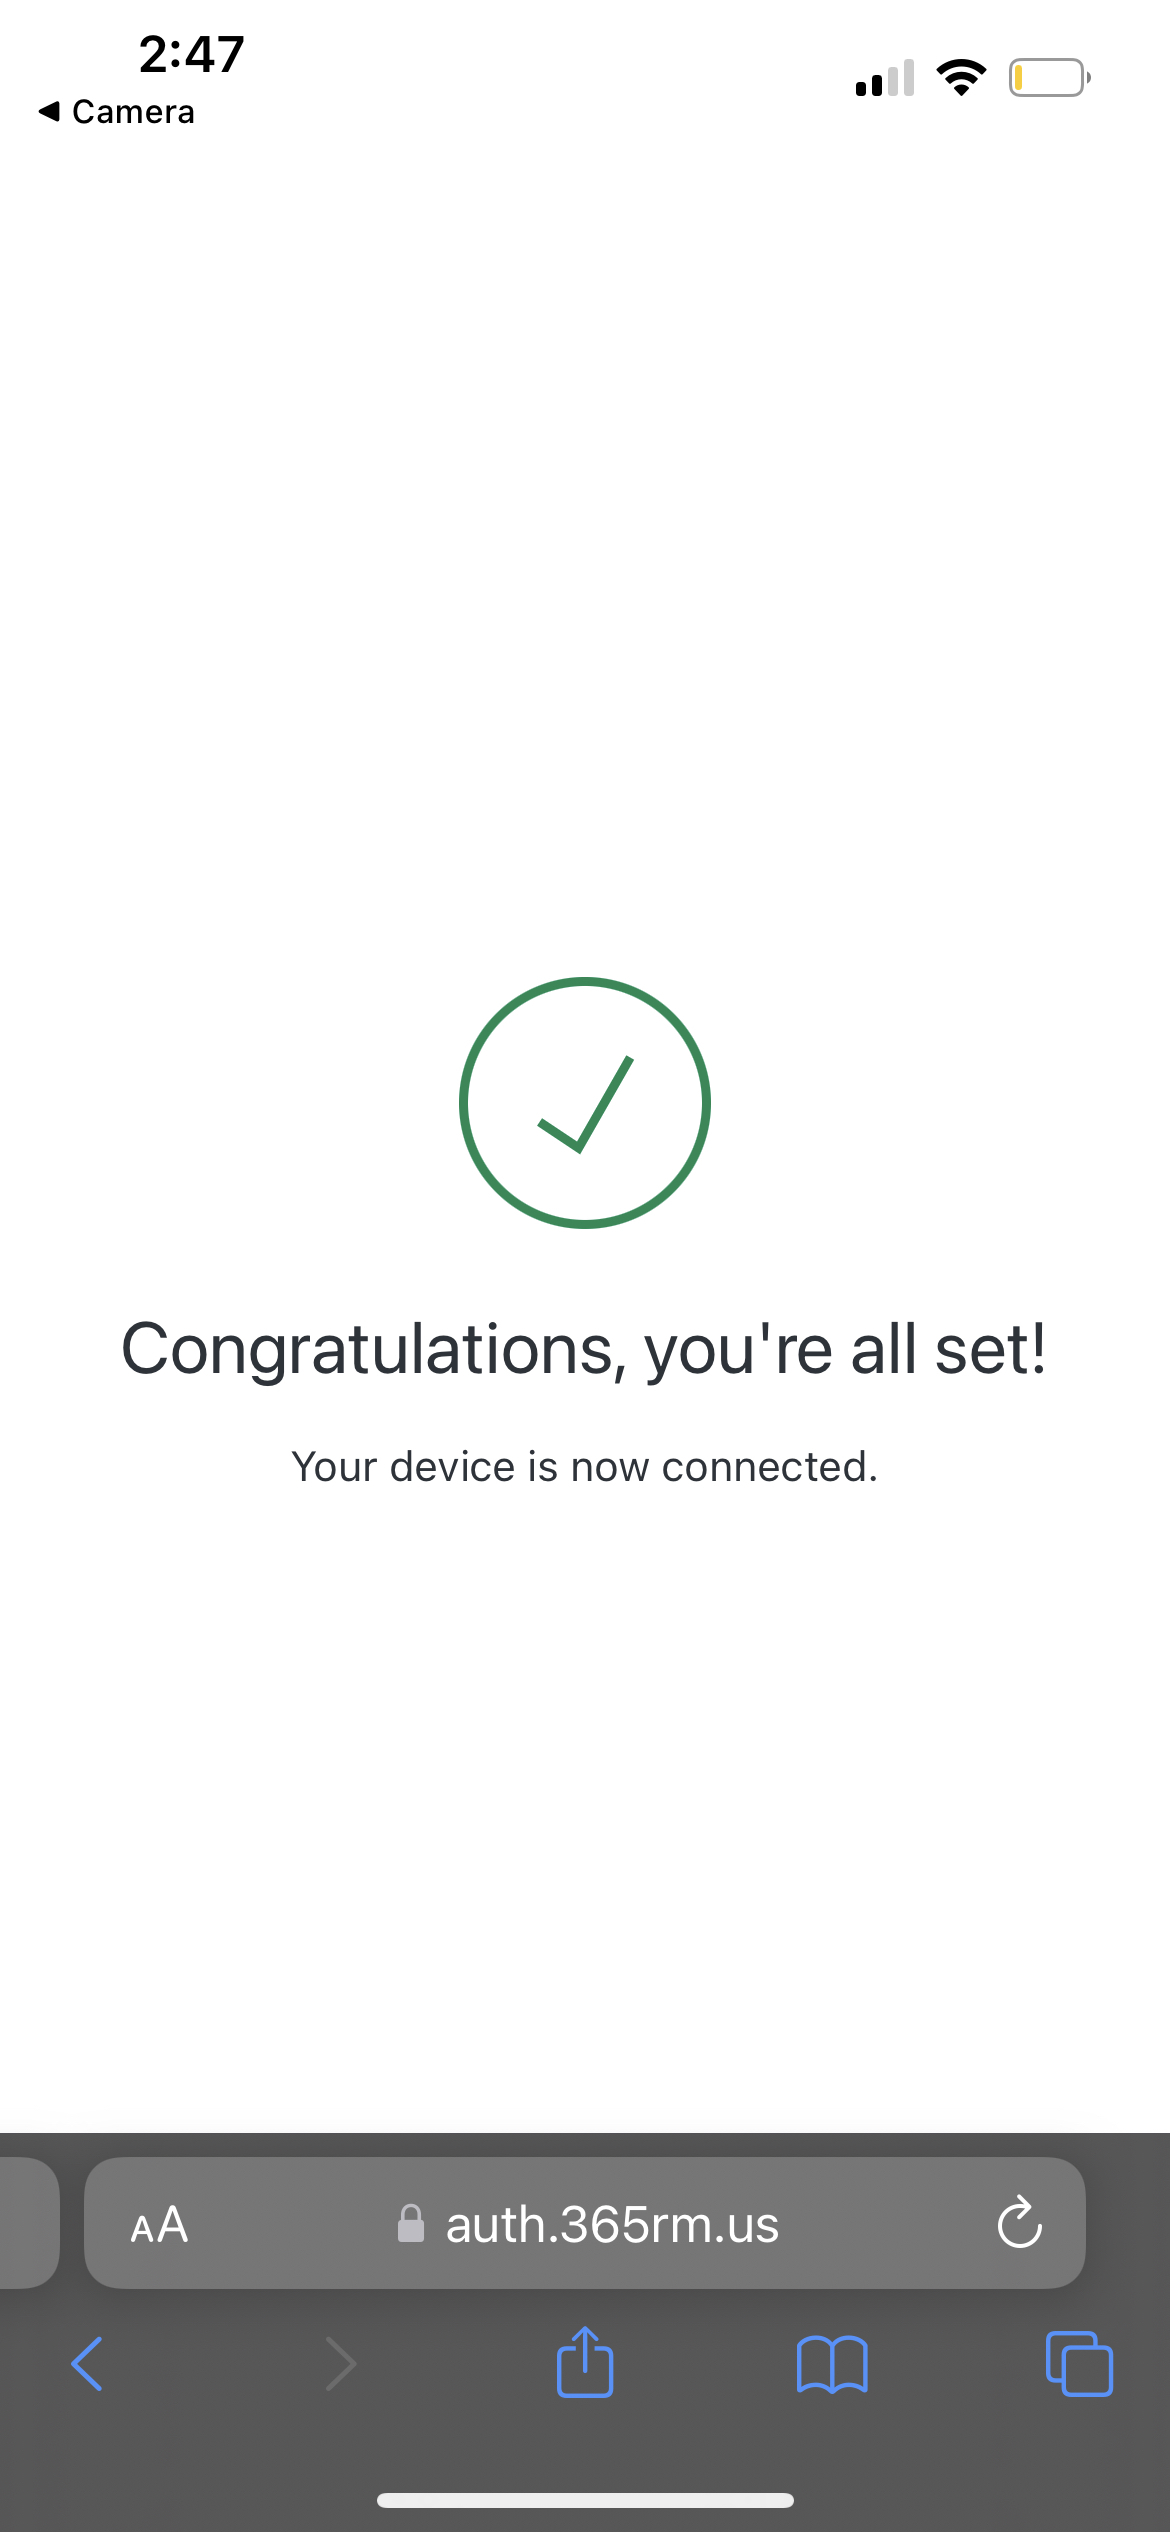 A screen displaying a green checkmark, with the text 'Congratulations, you're all set! Your device is now connected.'